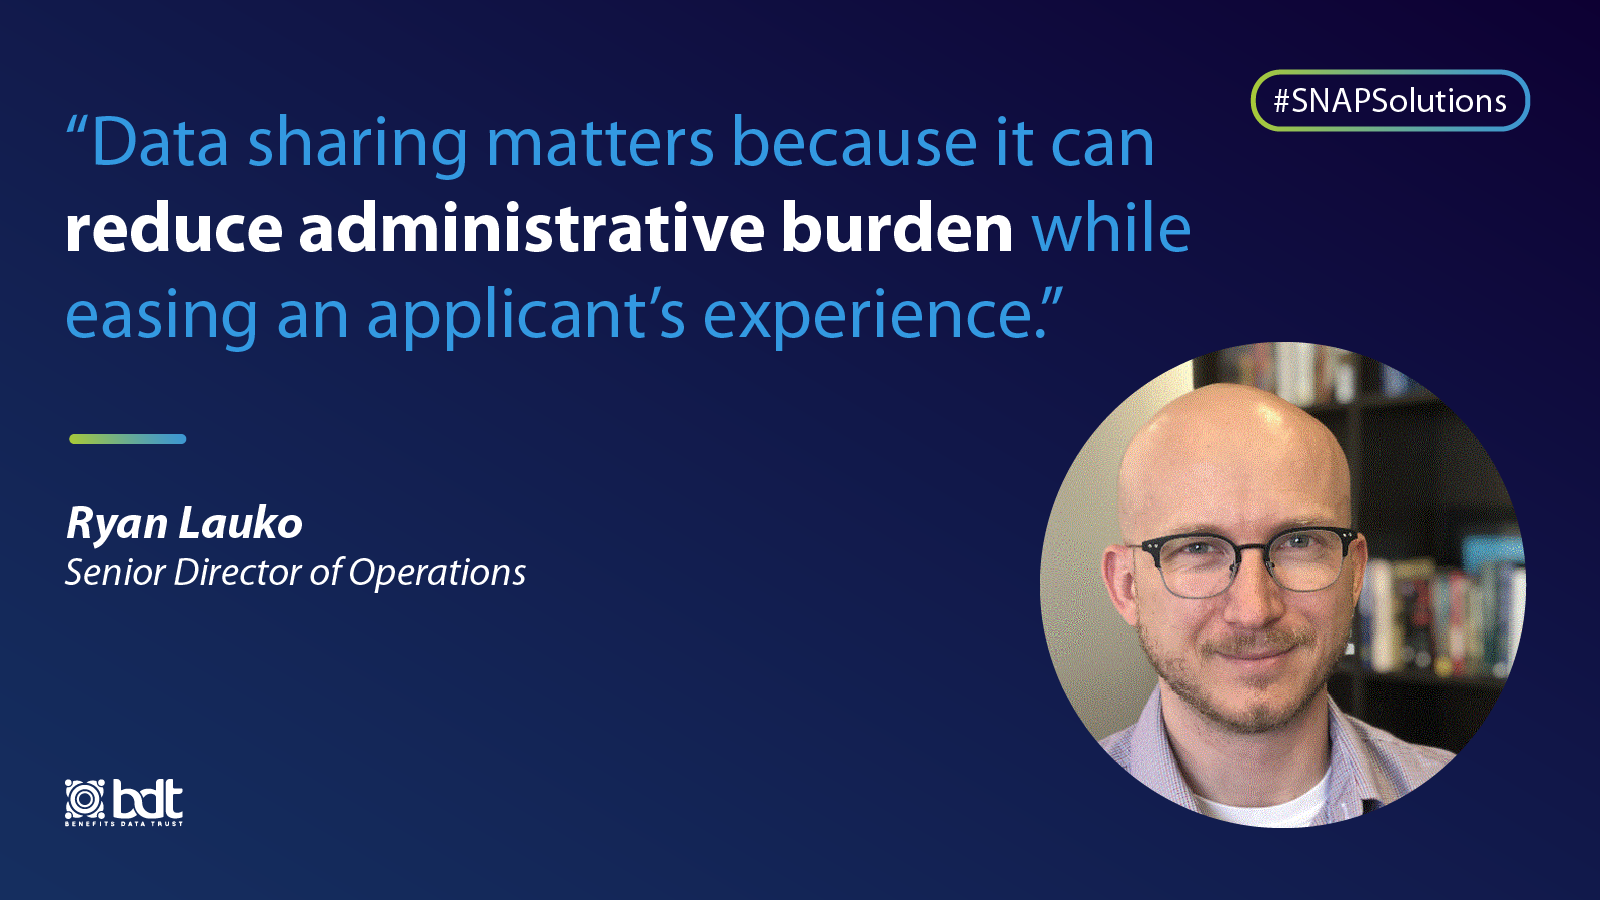 "Data sharing matters because it can reduce administrative burden while easing an applicant's experience." – Ryan Lauko, Senior Director of Operations